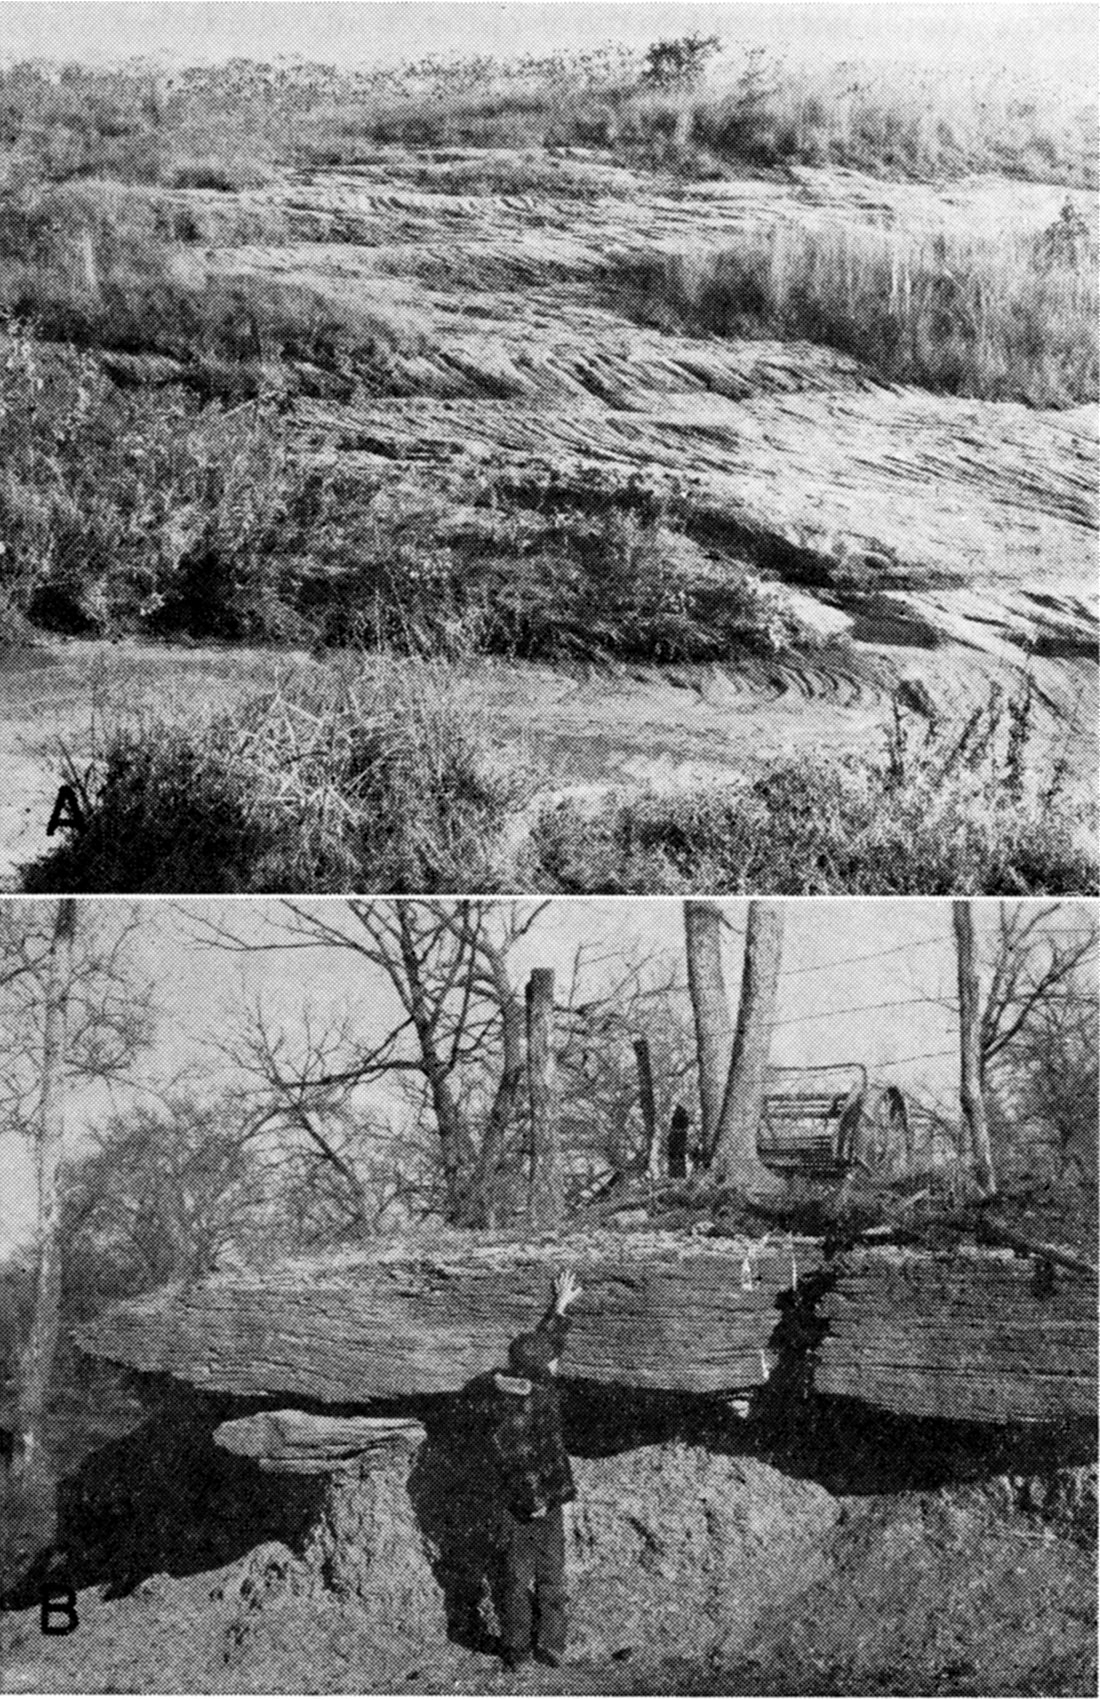 Two black and white photos; upper is of Ireland Sandstone member of Lawrence Shale at Hole in the Rock; lower is detrital Amazonia (?) Limestone member in upper part of Lawrence Shale.